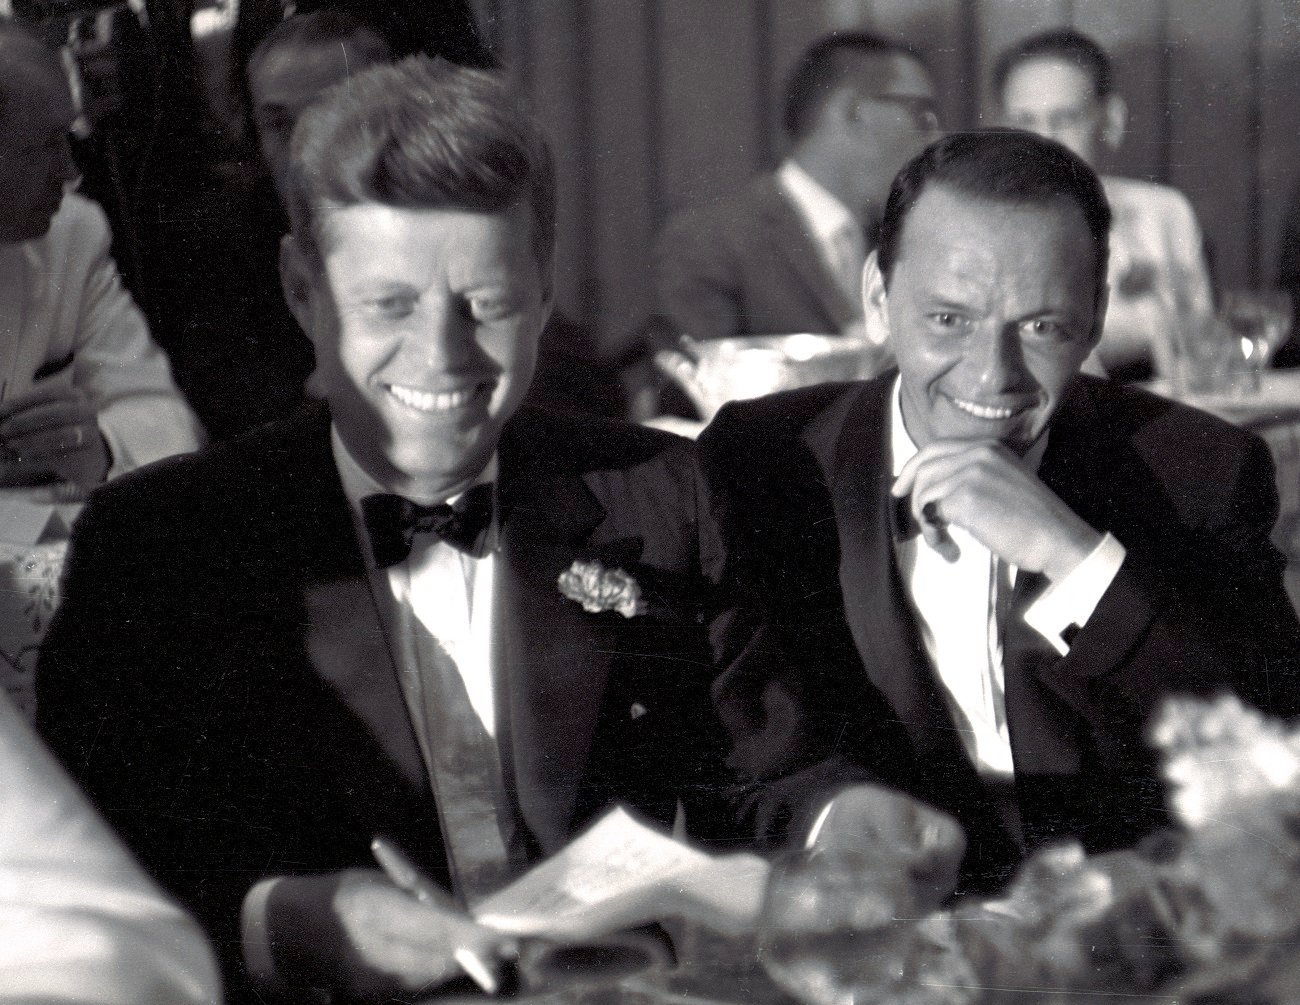 A black and white photo of John F. Kennedy and Frank Sinatra wearing tuxedos and sitting next to each other.